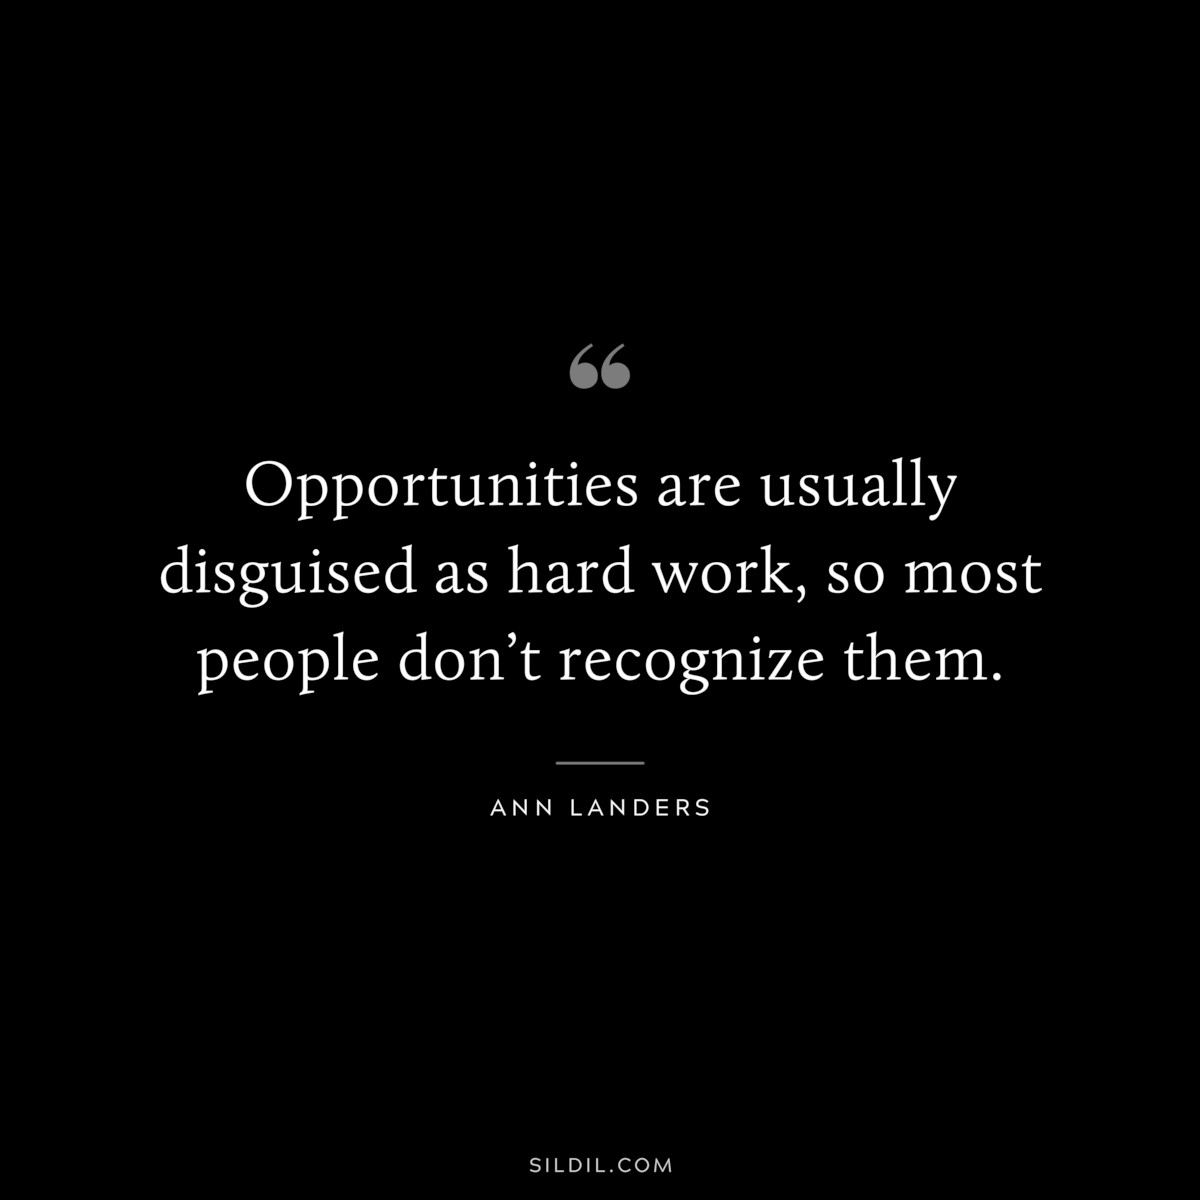 Opportunities are usually disguised as hard work, so most people don’t recognize them. ― Ann Landers